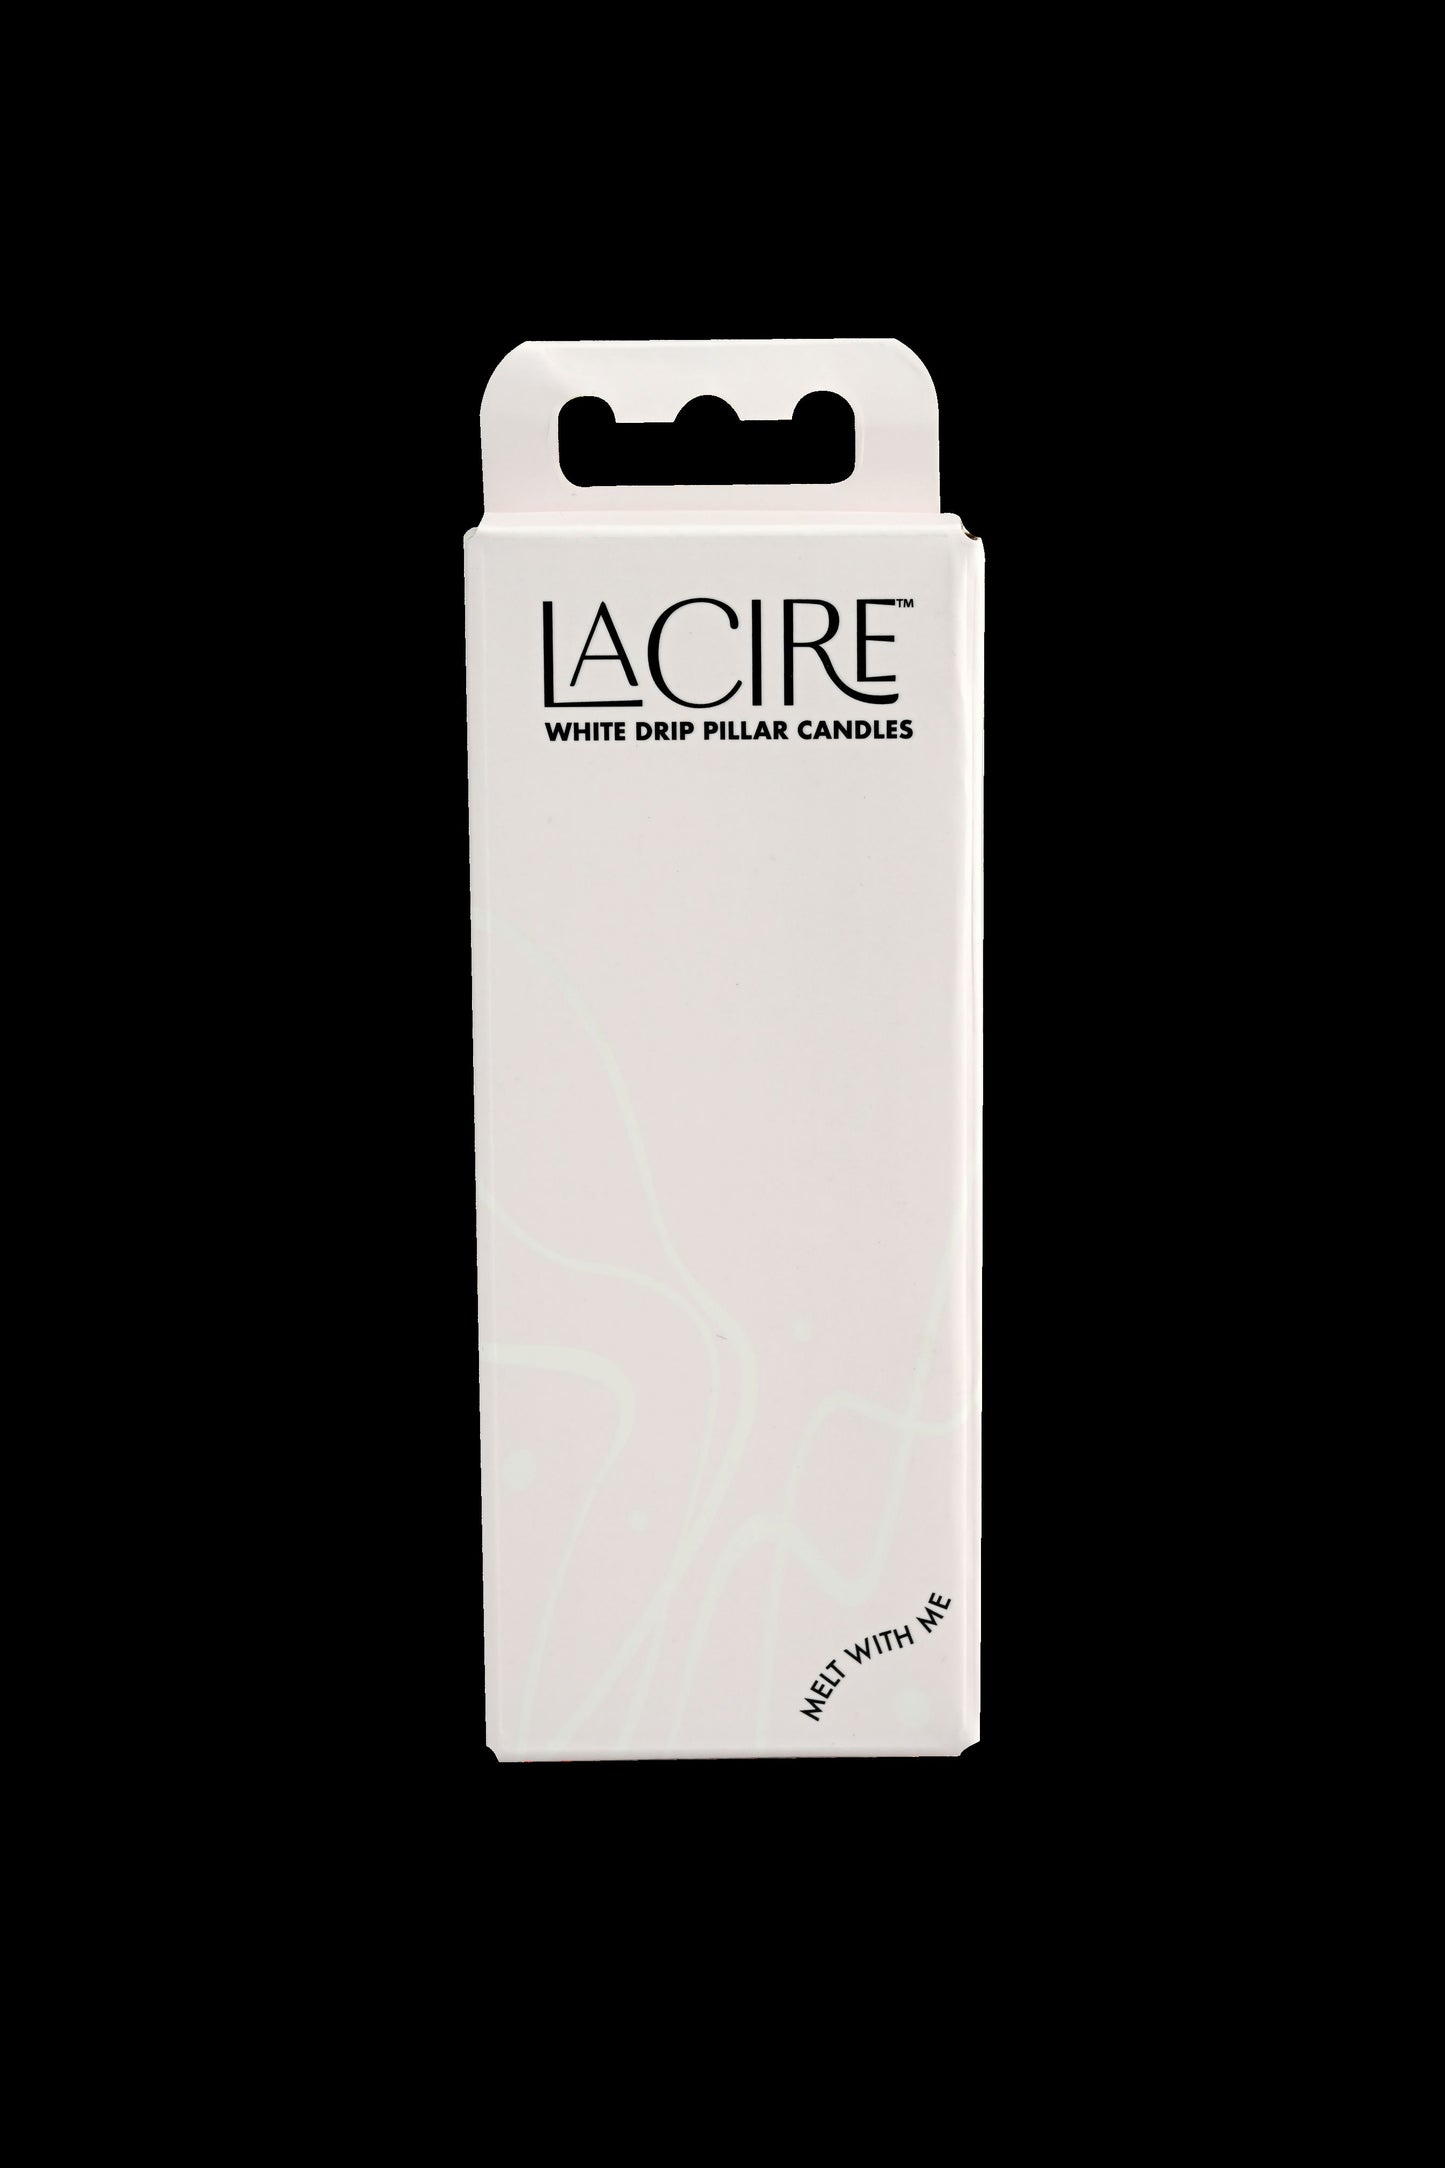 LaCire by Sportsheets Drip Pillar Candles in their box (white).